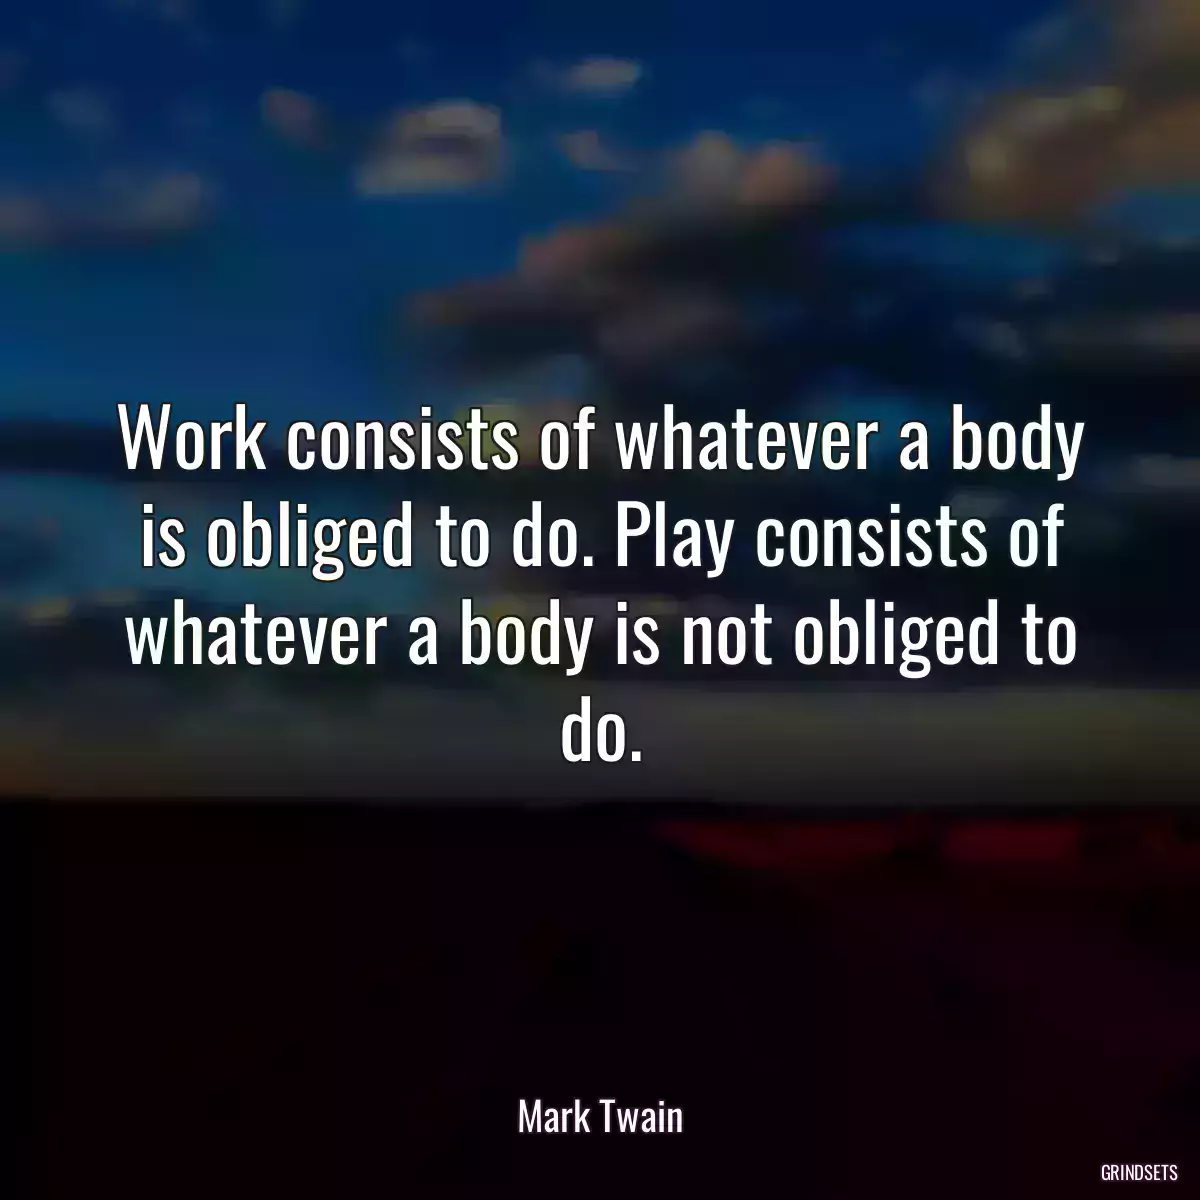 Work consists of whatever a body is obliged to do. Play consists of whatever a body is not obliged to do.